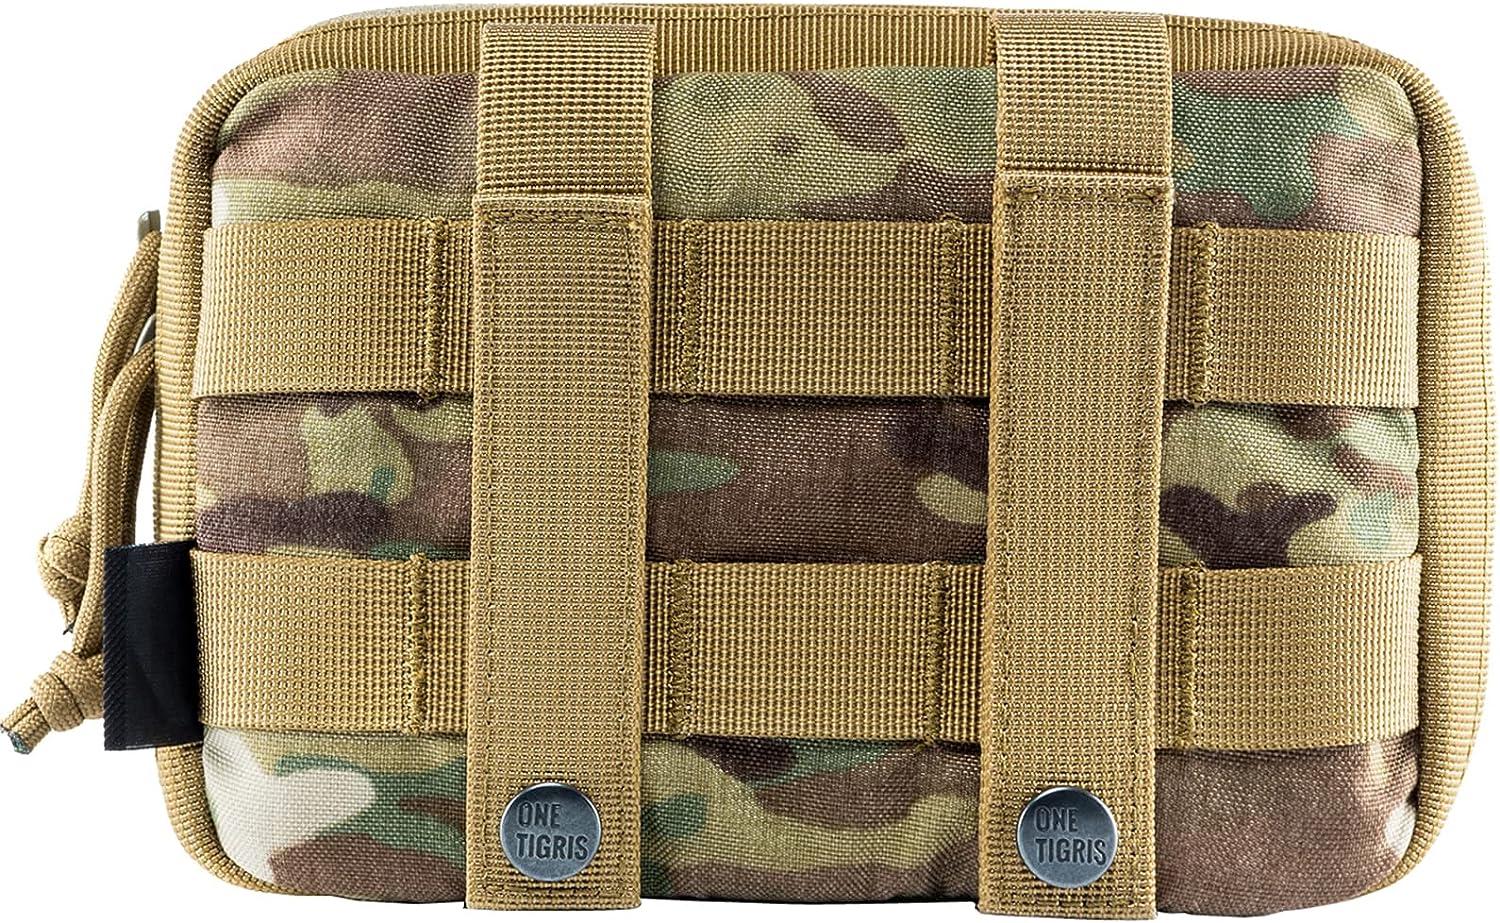 OneTigris Small MOLLE Pouch, Tactical Admin Pouch Belt EDC Tool Organizer  Zippered Utility Waist Pack 7.5x5x2 Multicam